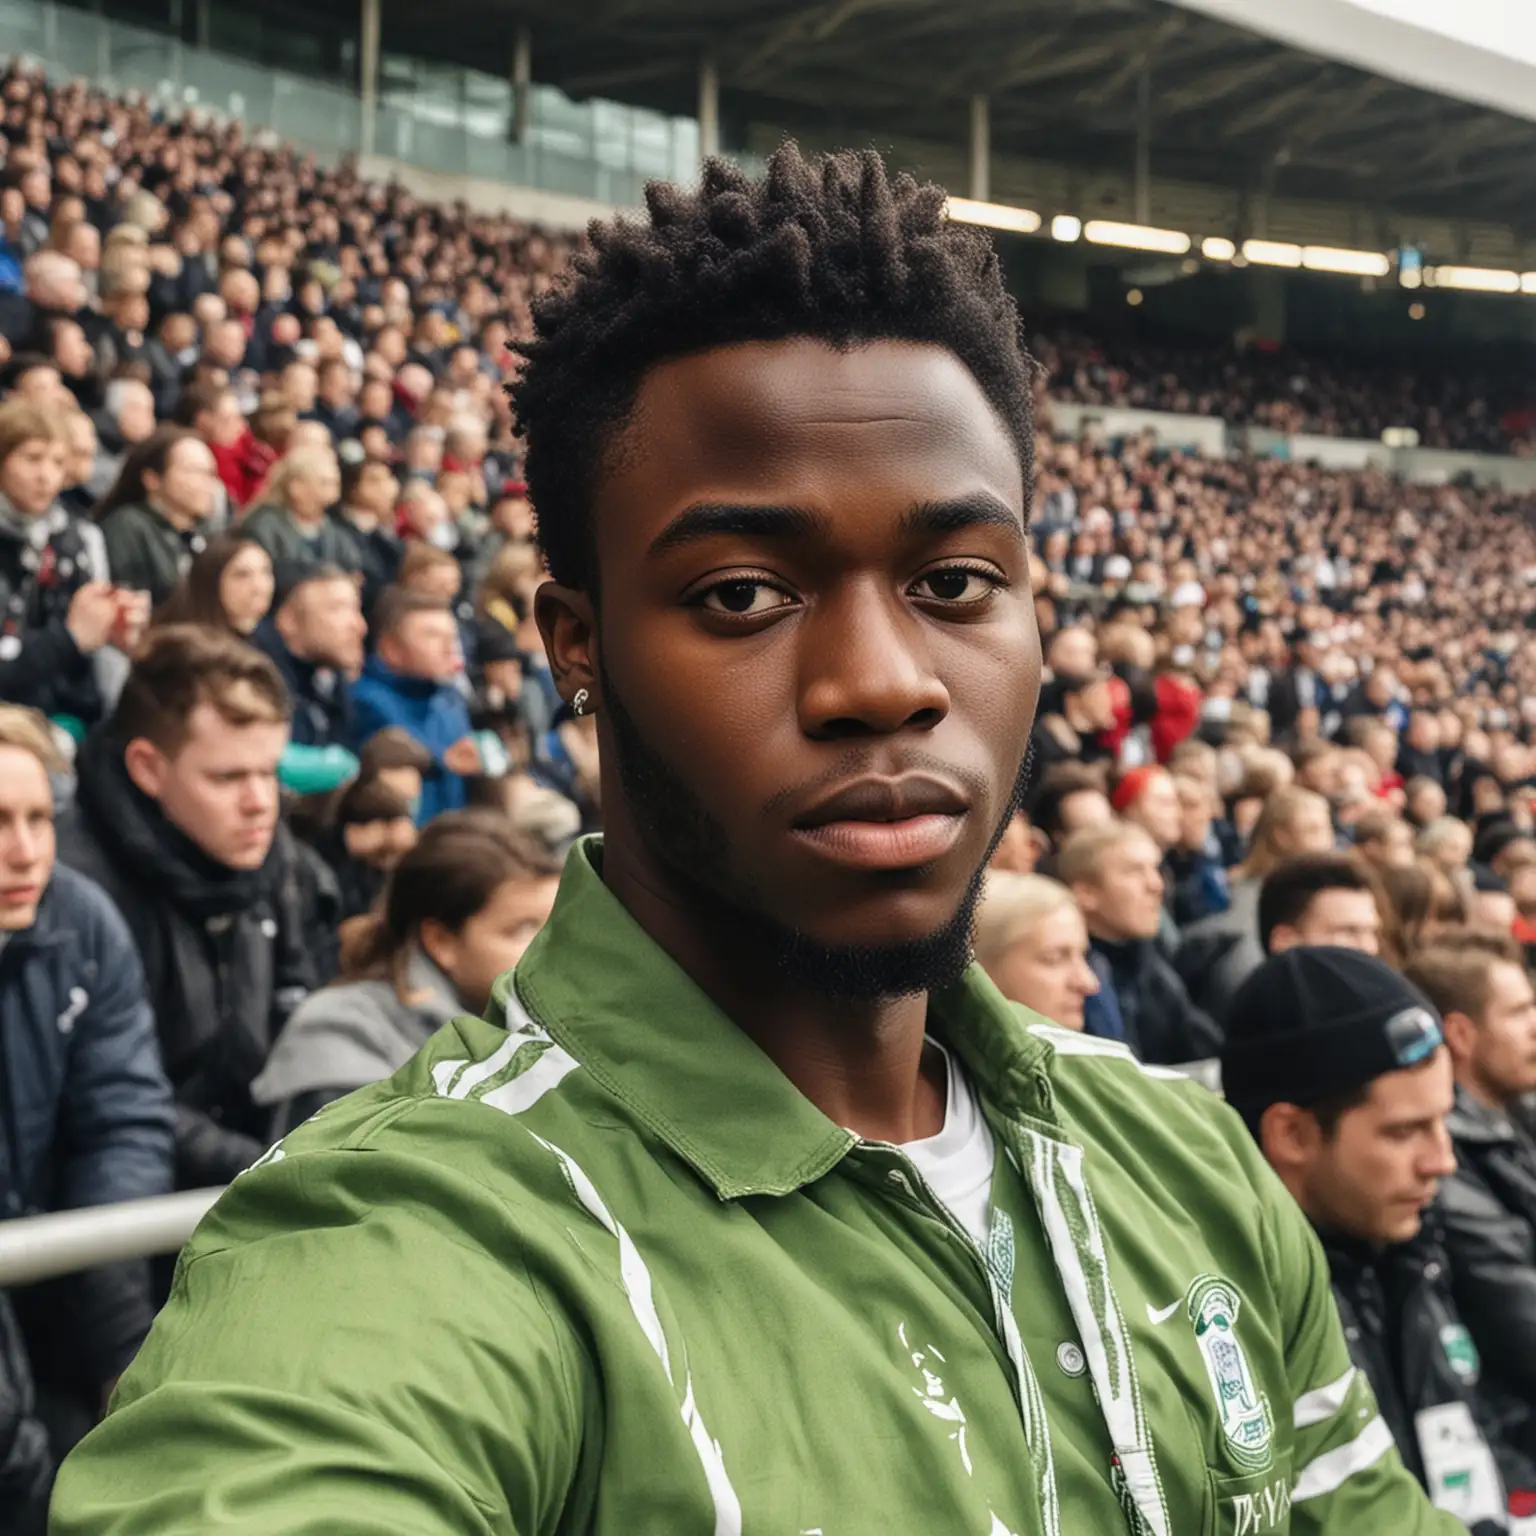 Eye-catching image of a Nigerian guy, Reuben  attending a football game in the UK